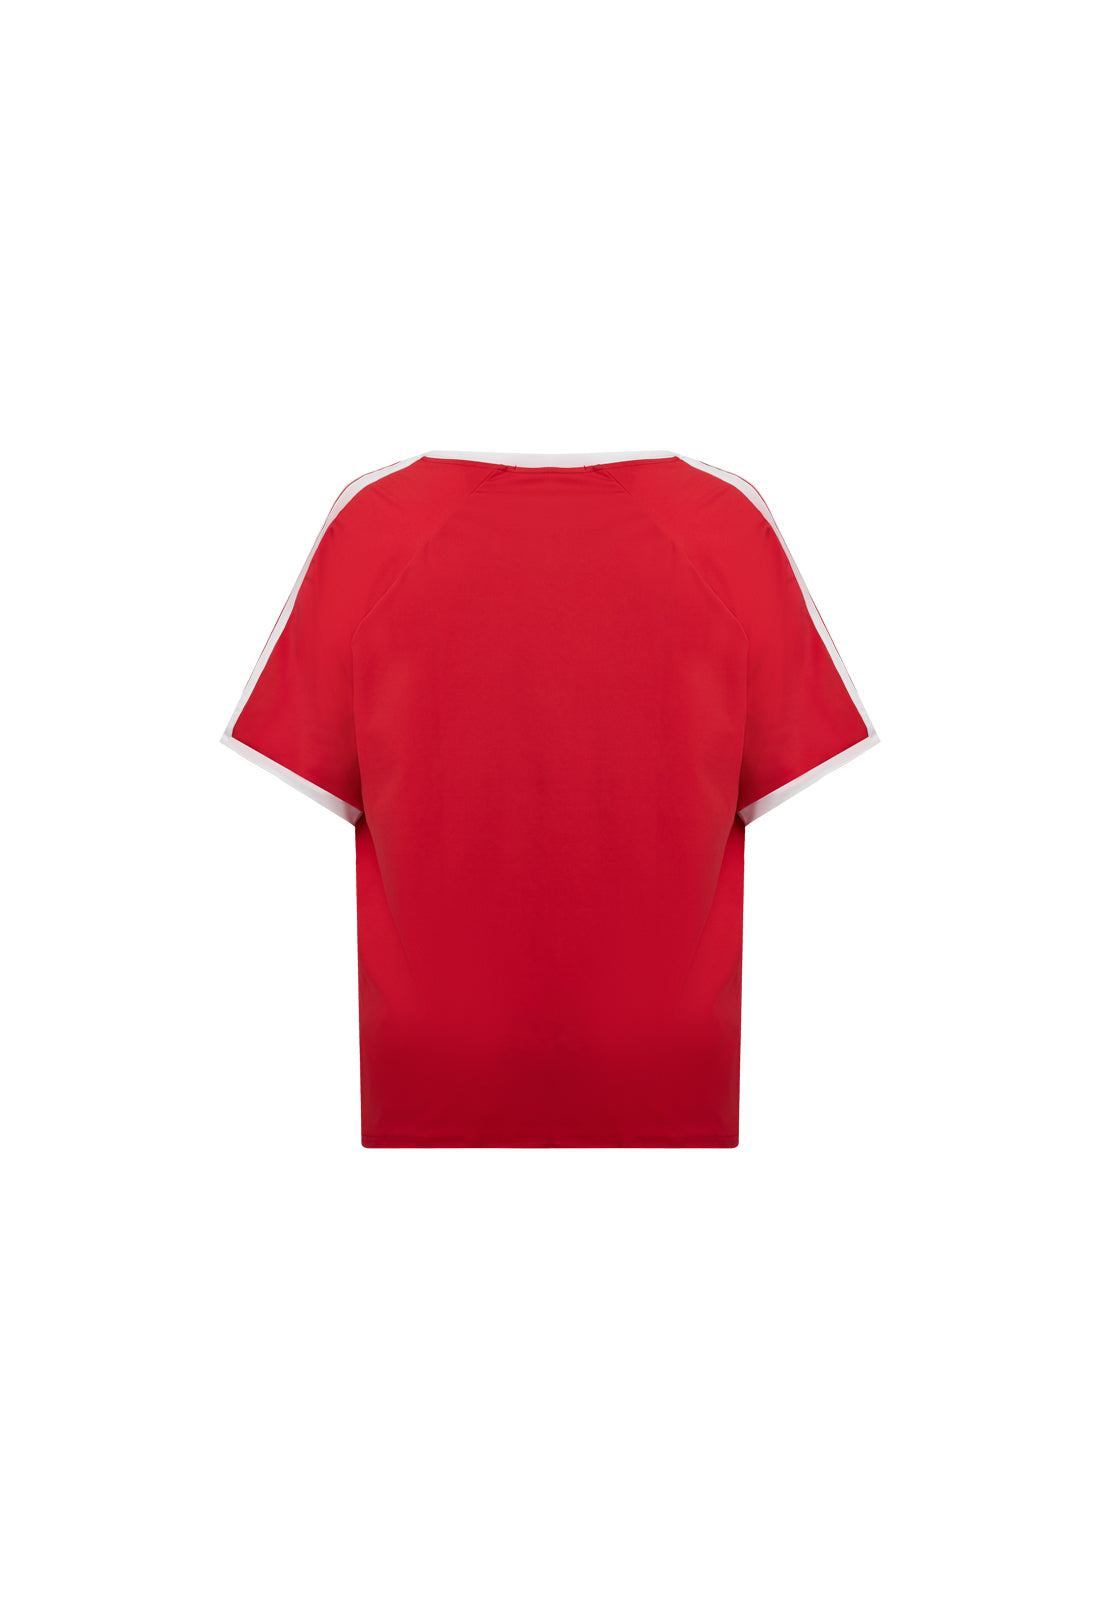 SPECTATE TOP - POPPY RED